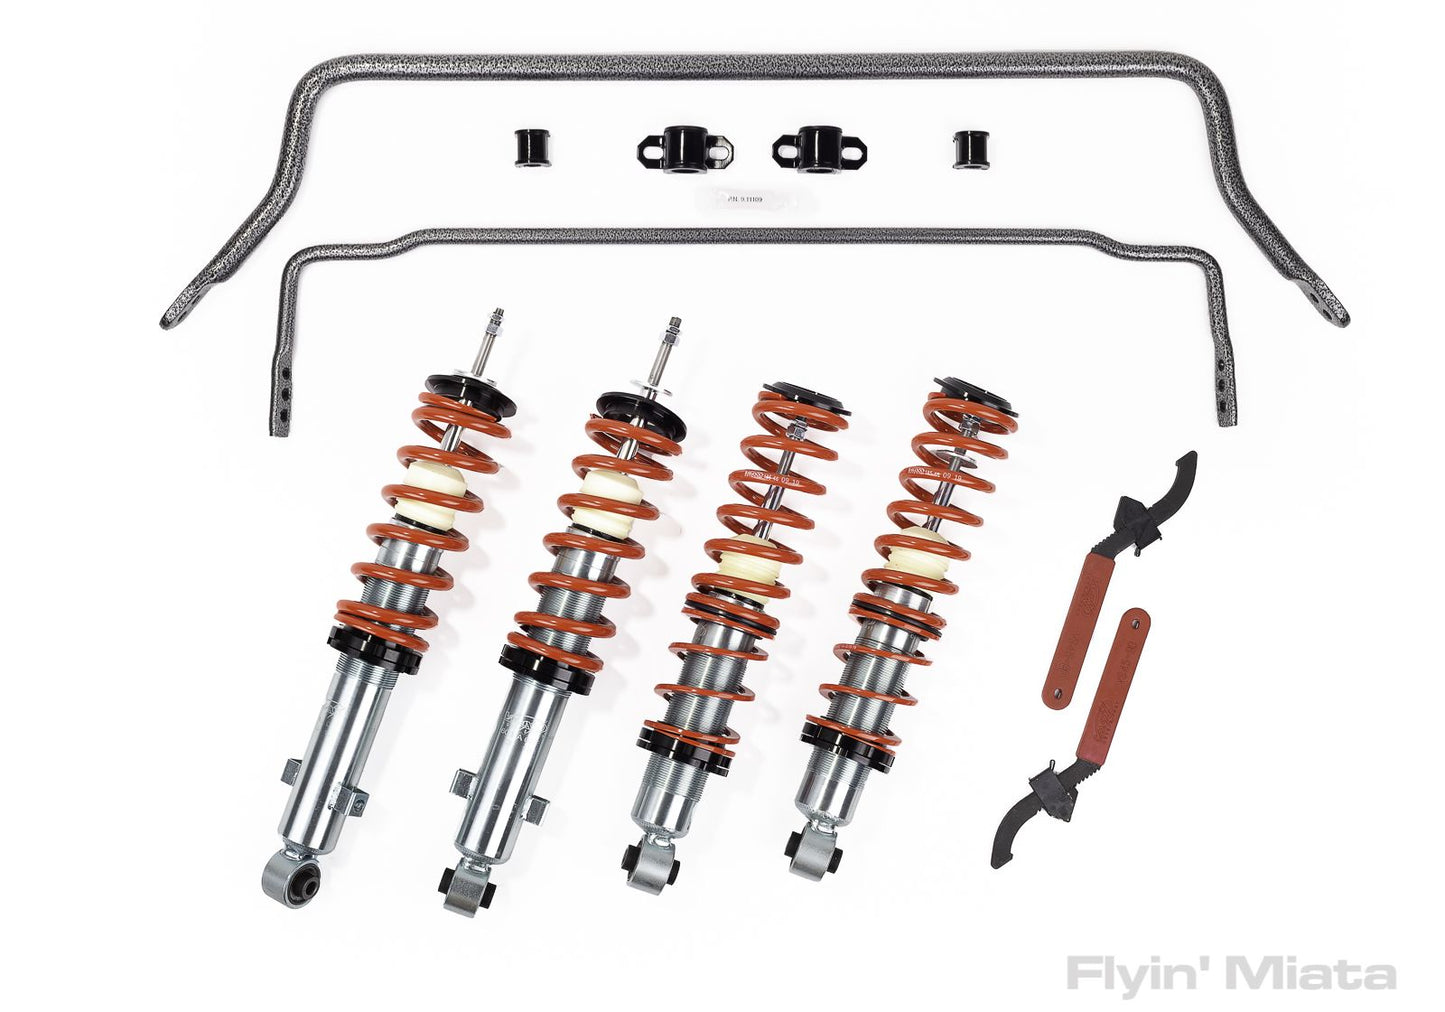 FM V-Maxx Classic Stage 2 suspension kit for NB